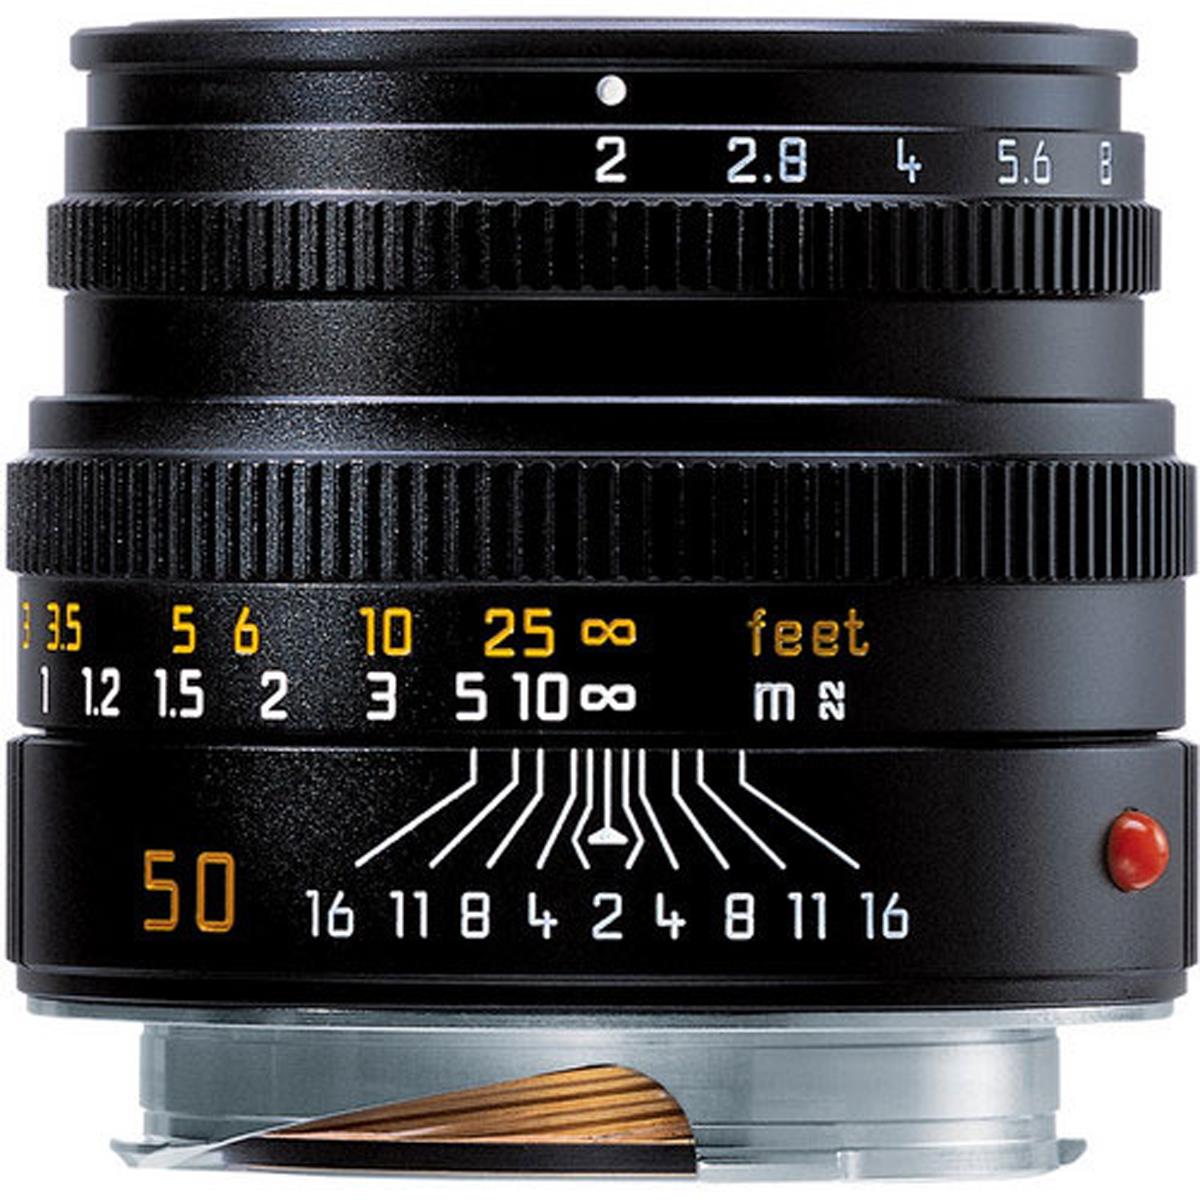 

Leica 50mm f/2 Summicron-M Aspherical Lens for M System, Black